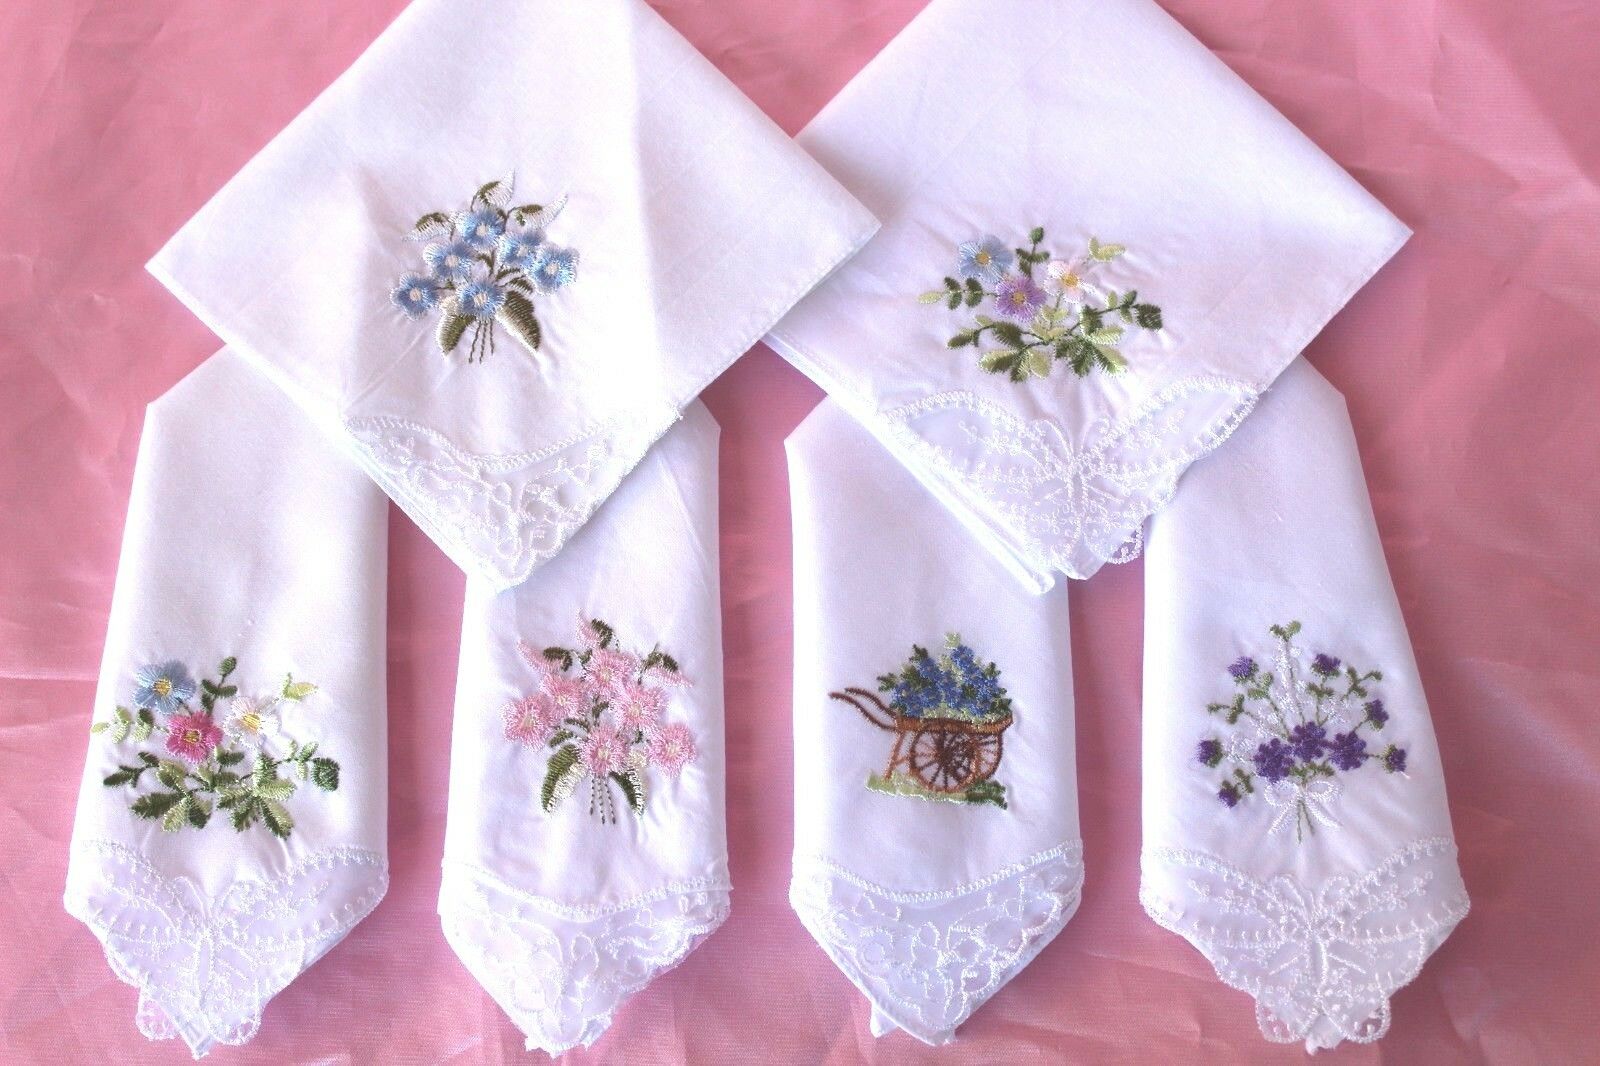 Lace Handkerchiefs Lot Six Cotton Hankies Women's 6 Floral Embroidered White New